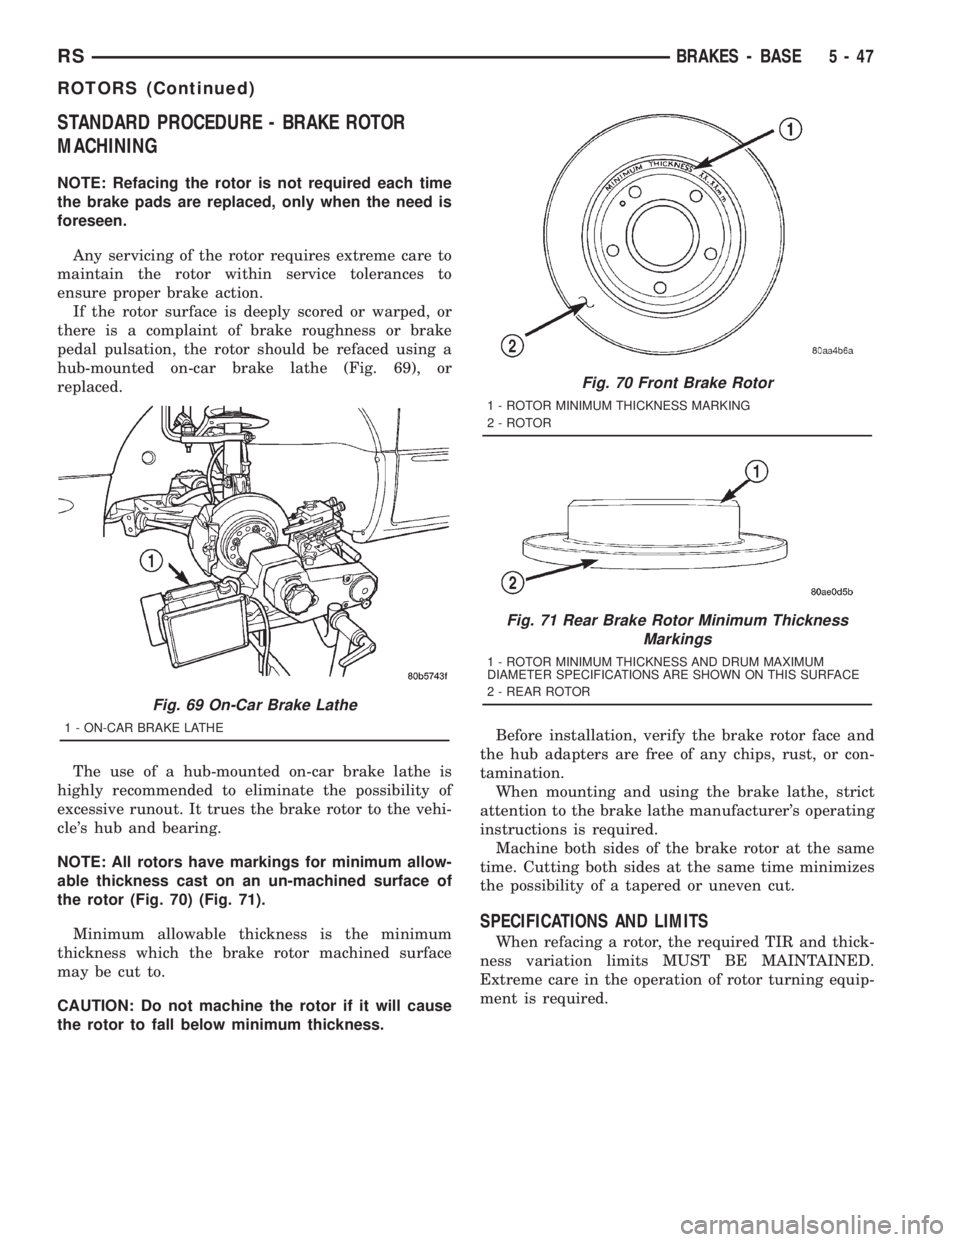 CHRYSLER VOYAGER 2001 Owners Guide STANDARD PROCEDURE - BRAKE ROTOR
MACHINING
NOTE: Refacing the rotor is not required each time
the brake pads are replaced, only when the need is
foreseen.
Any servicing of the rotor requires extreme c